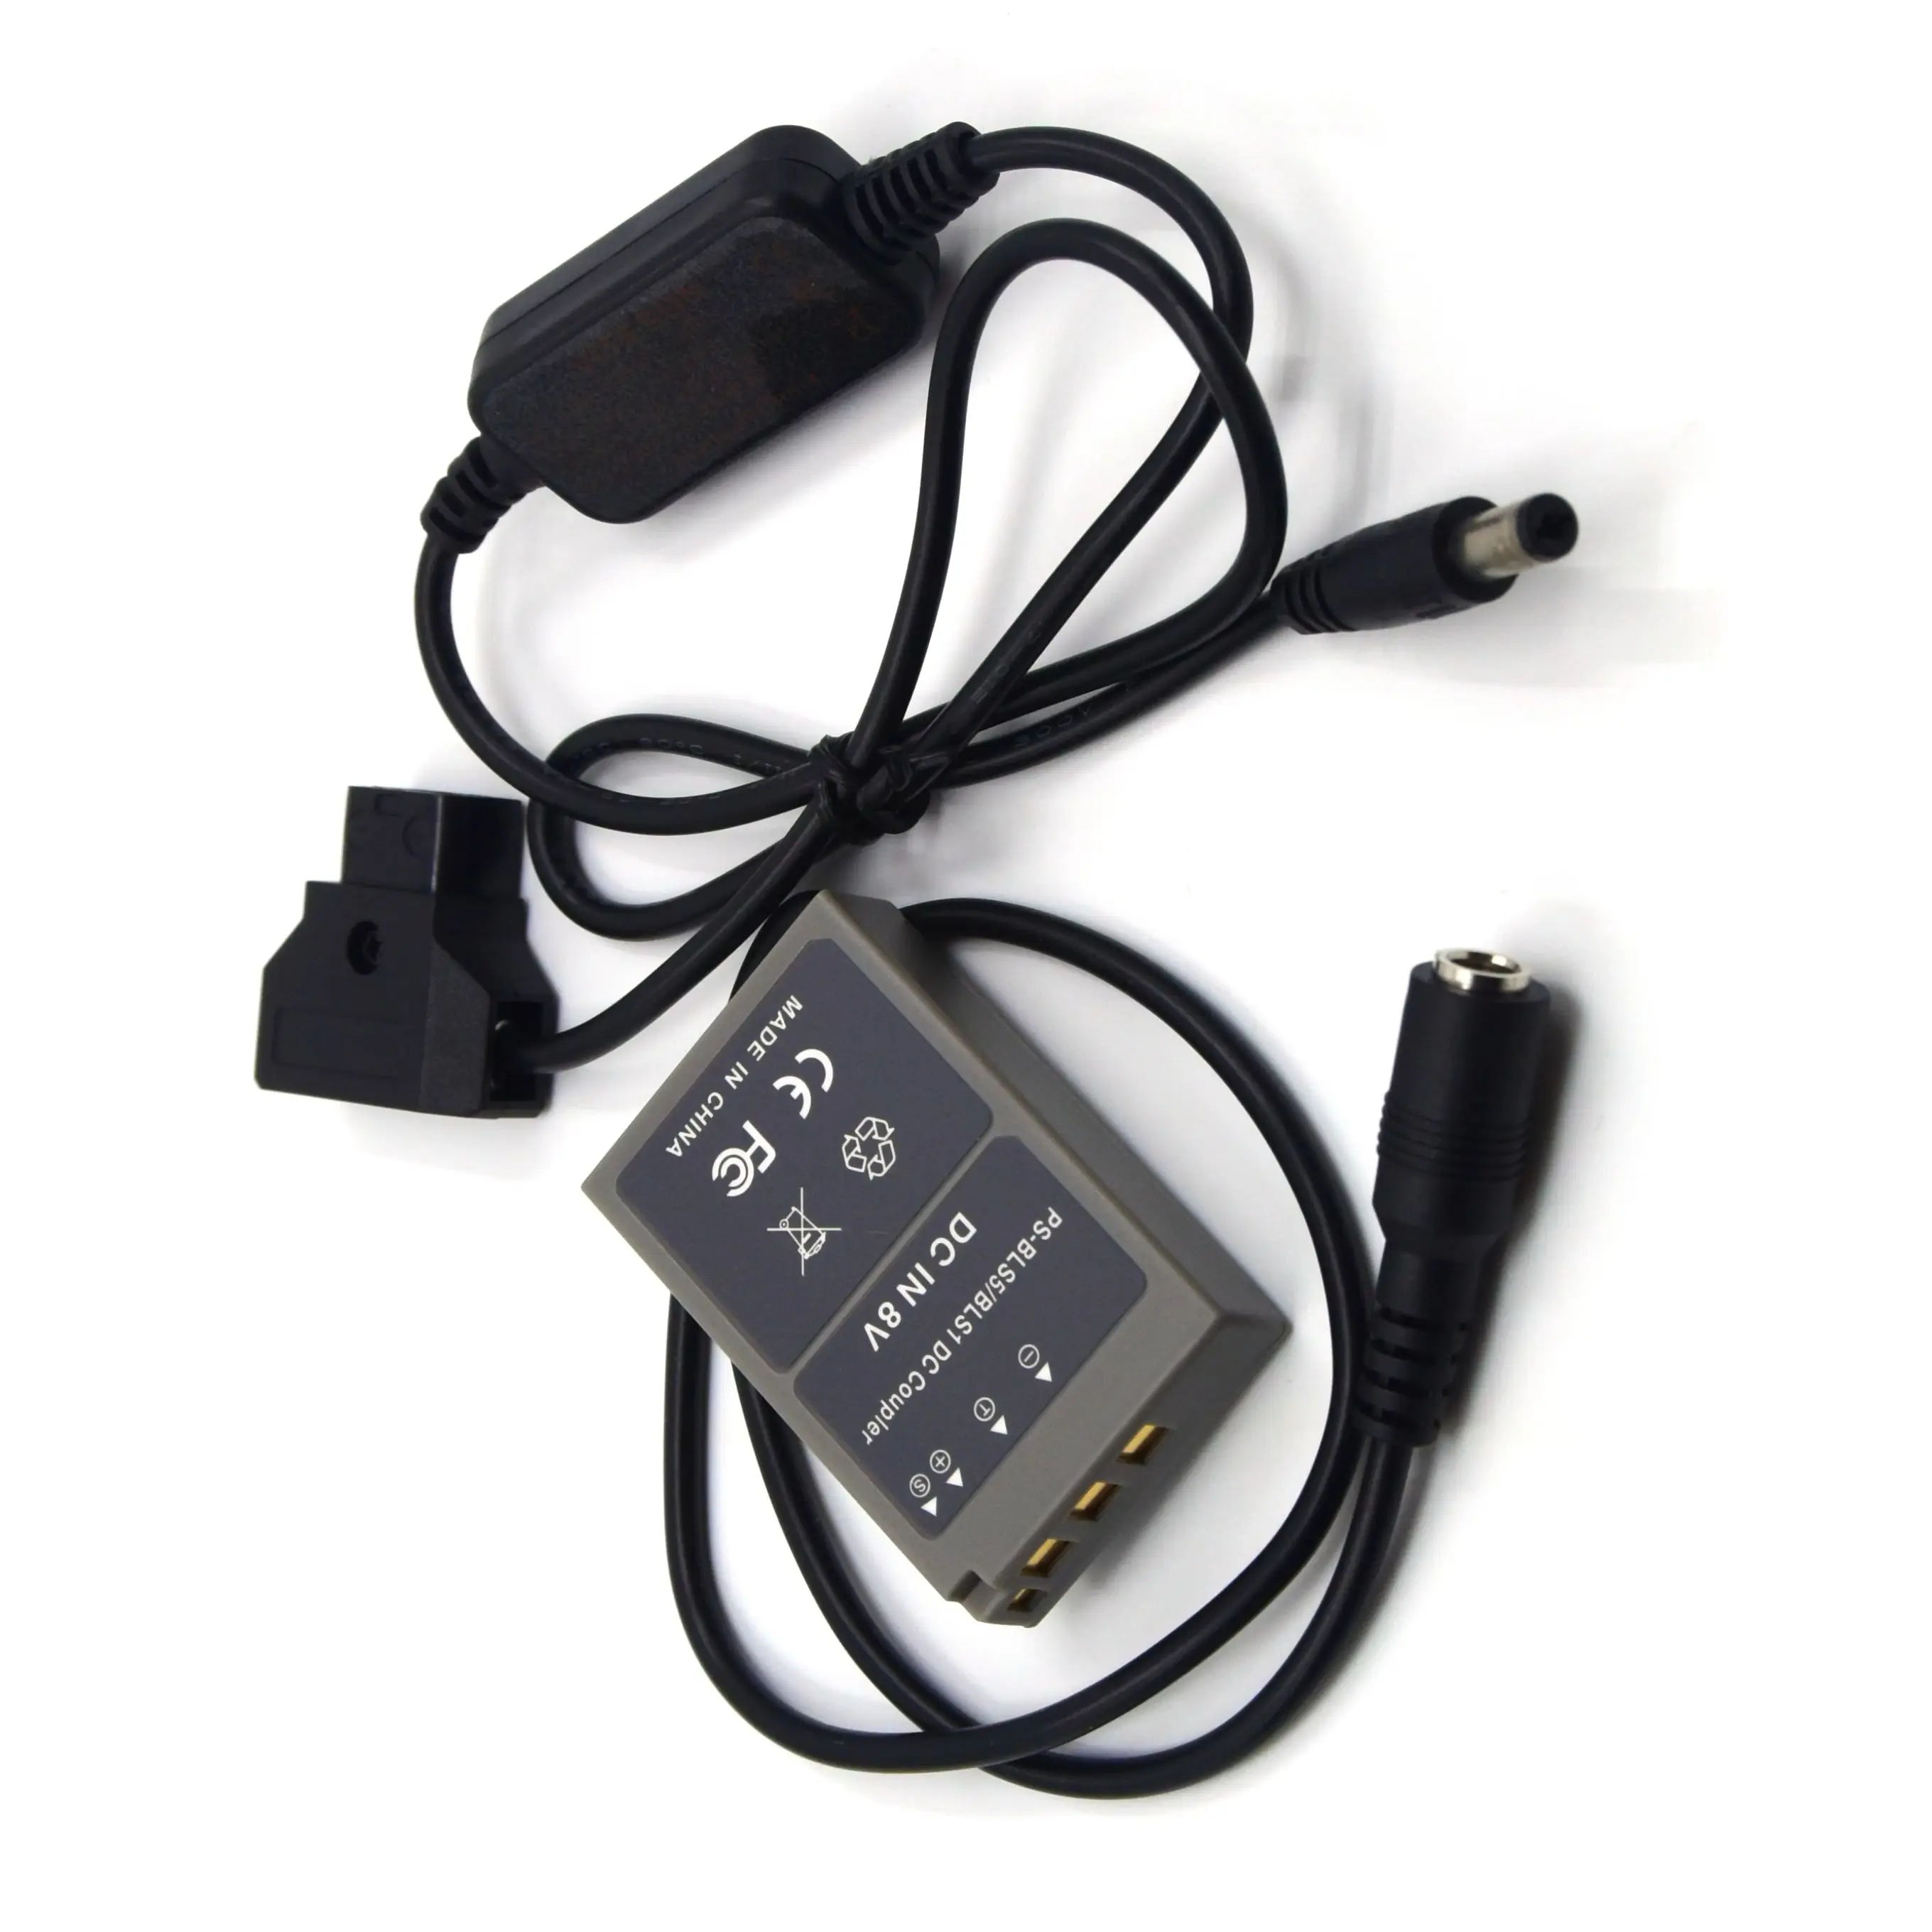 

D-Tap Power Cable PS-BLS-5 BLS5 Dummy Battery for Olympus PEN E-PL7 E-PL5 E-PM2 Stylus 1 1S OM-D E-M10 Mark II III Camera